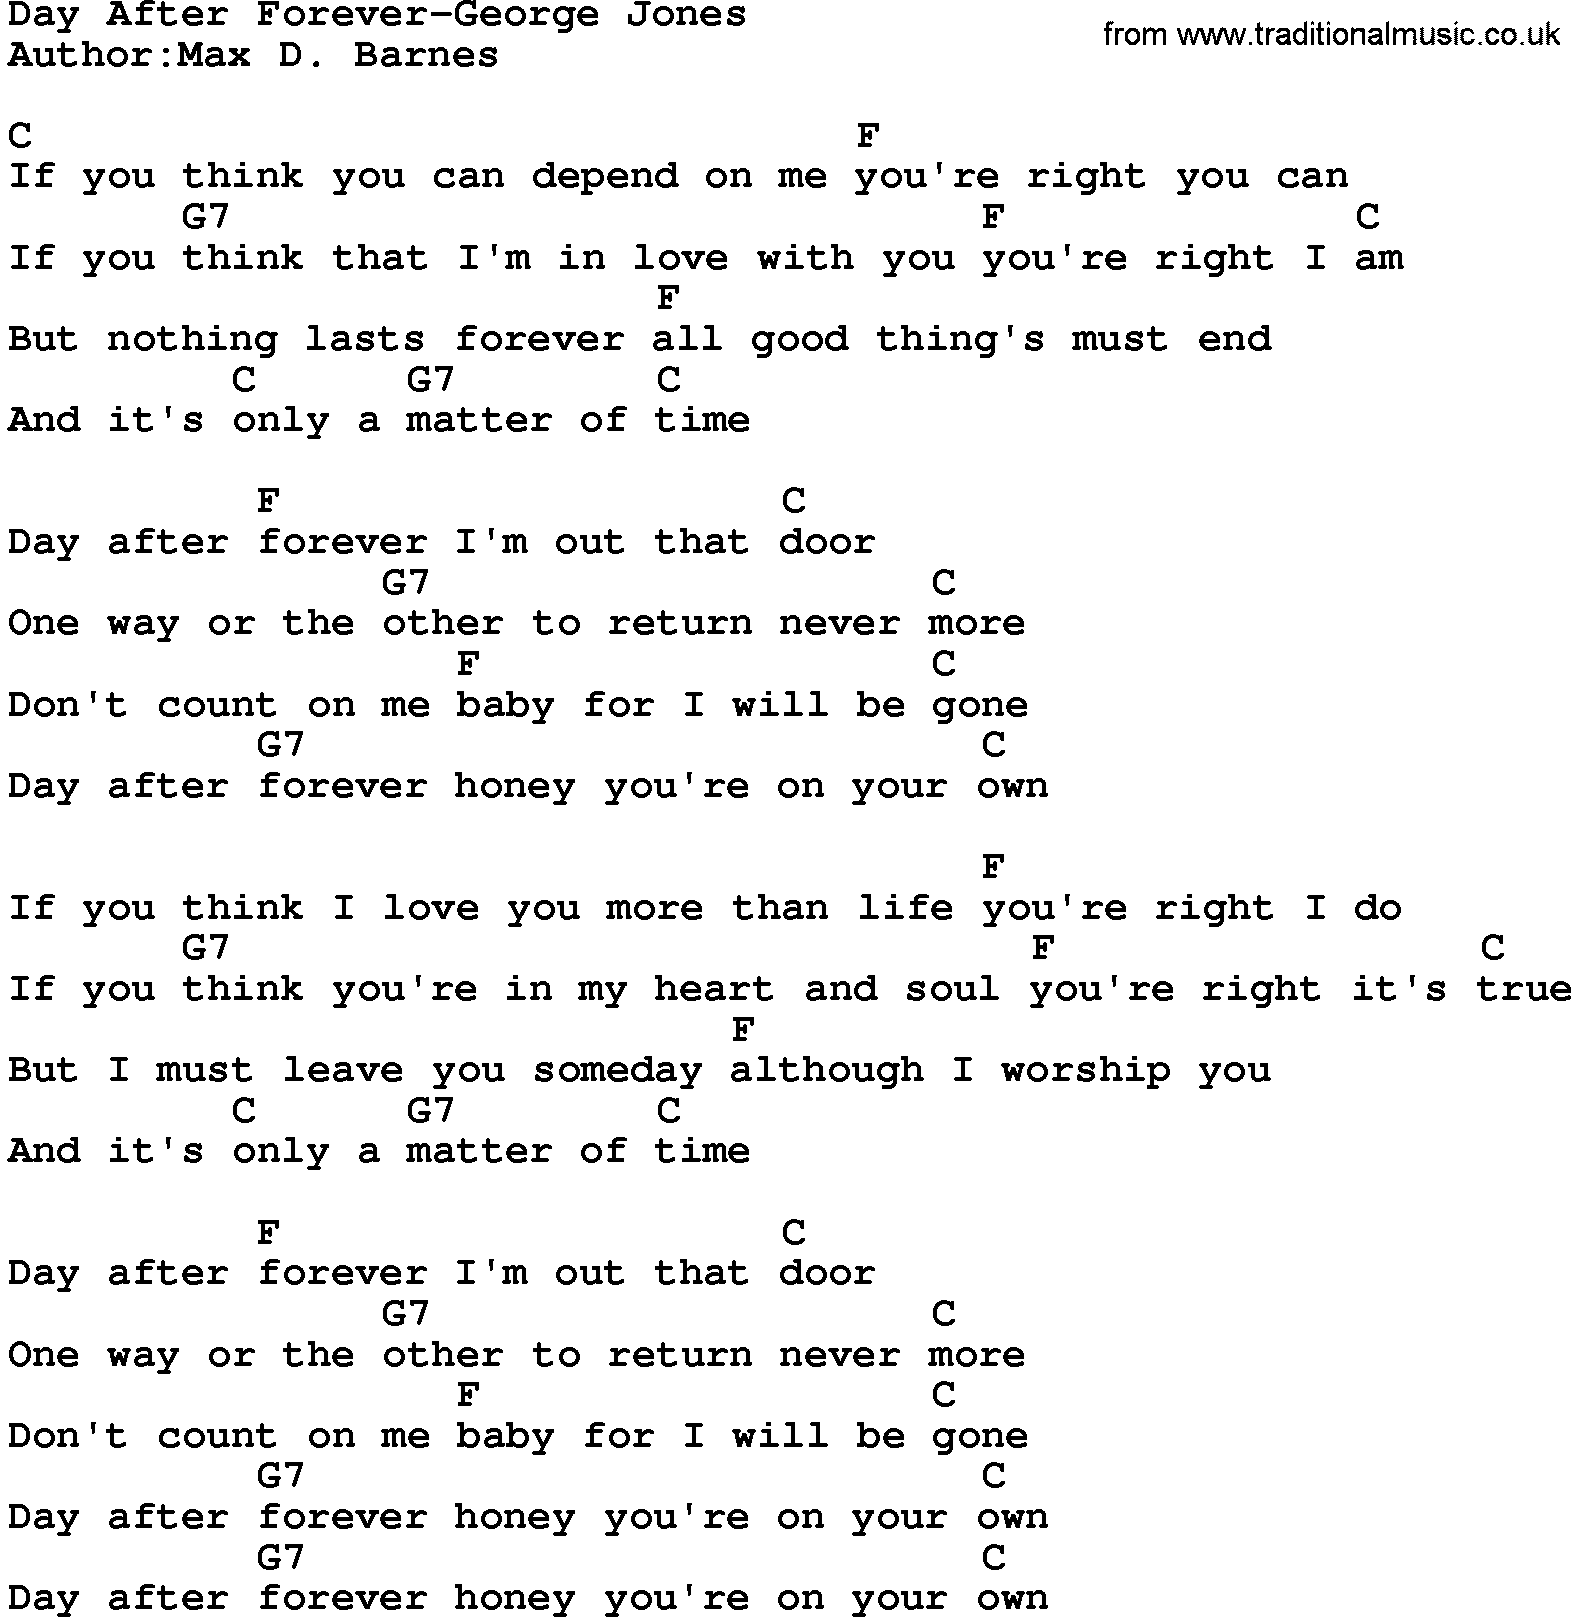 Country music song: Day After Forever-George Jones lyrics and chords